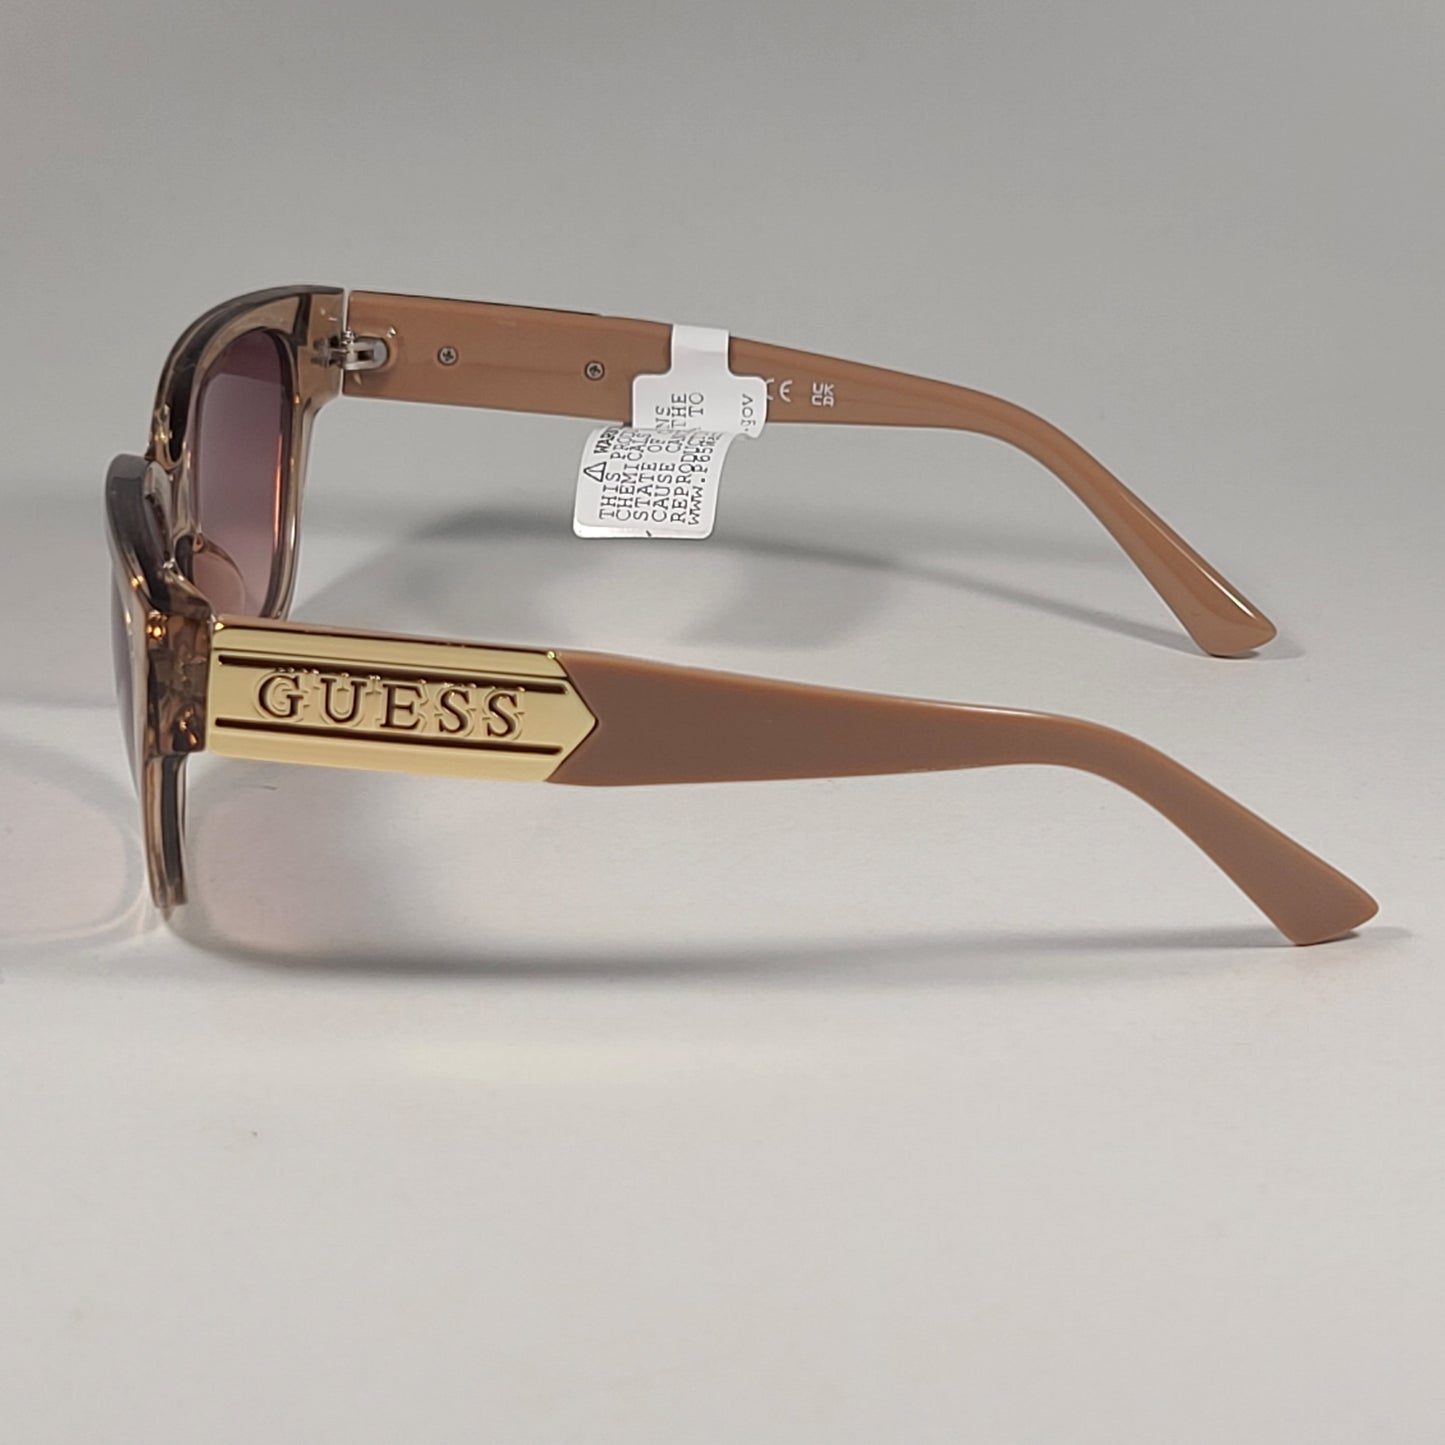 Guess GO0004 52F Cat Eye Sunglasses Nude And Crystal Frame Brown Gradient Lens